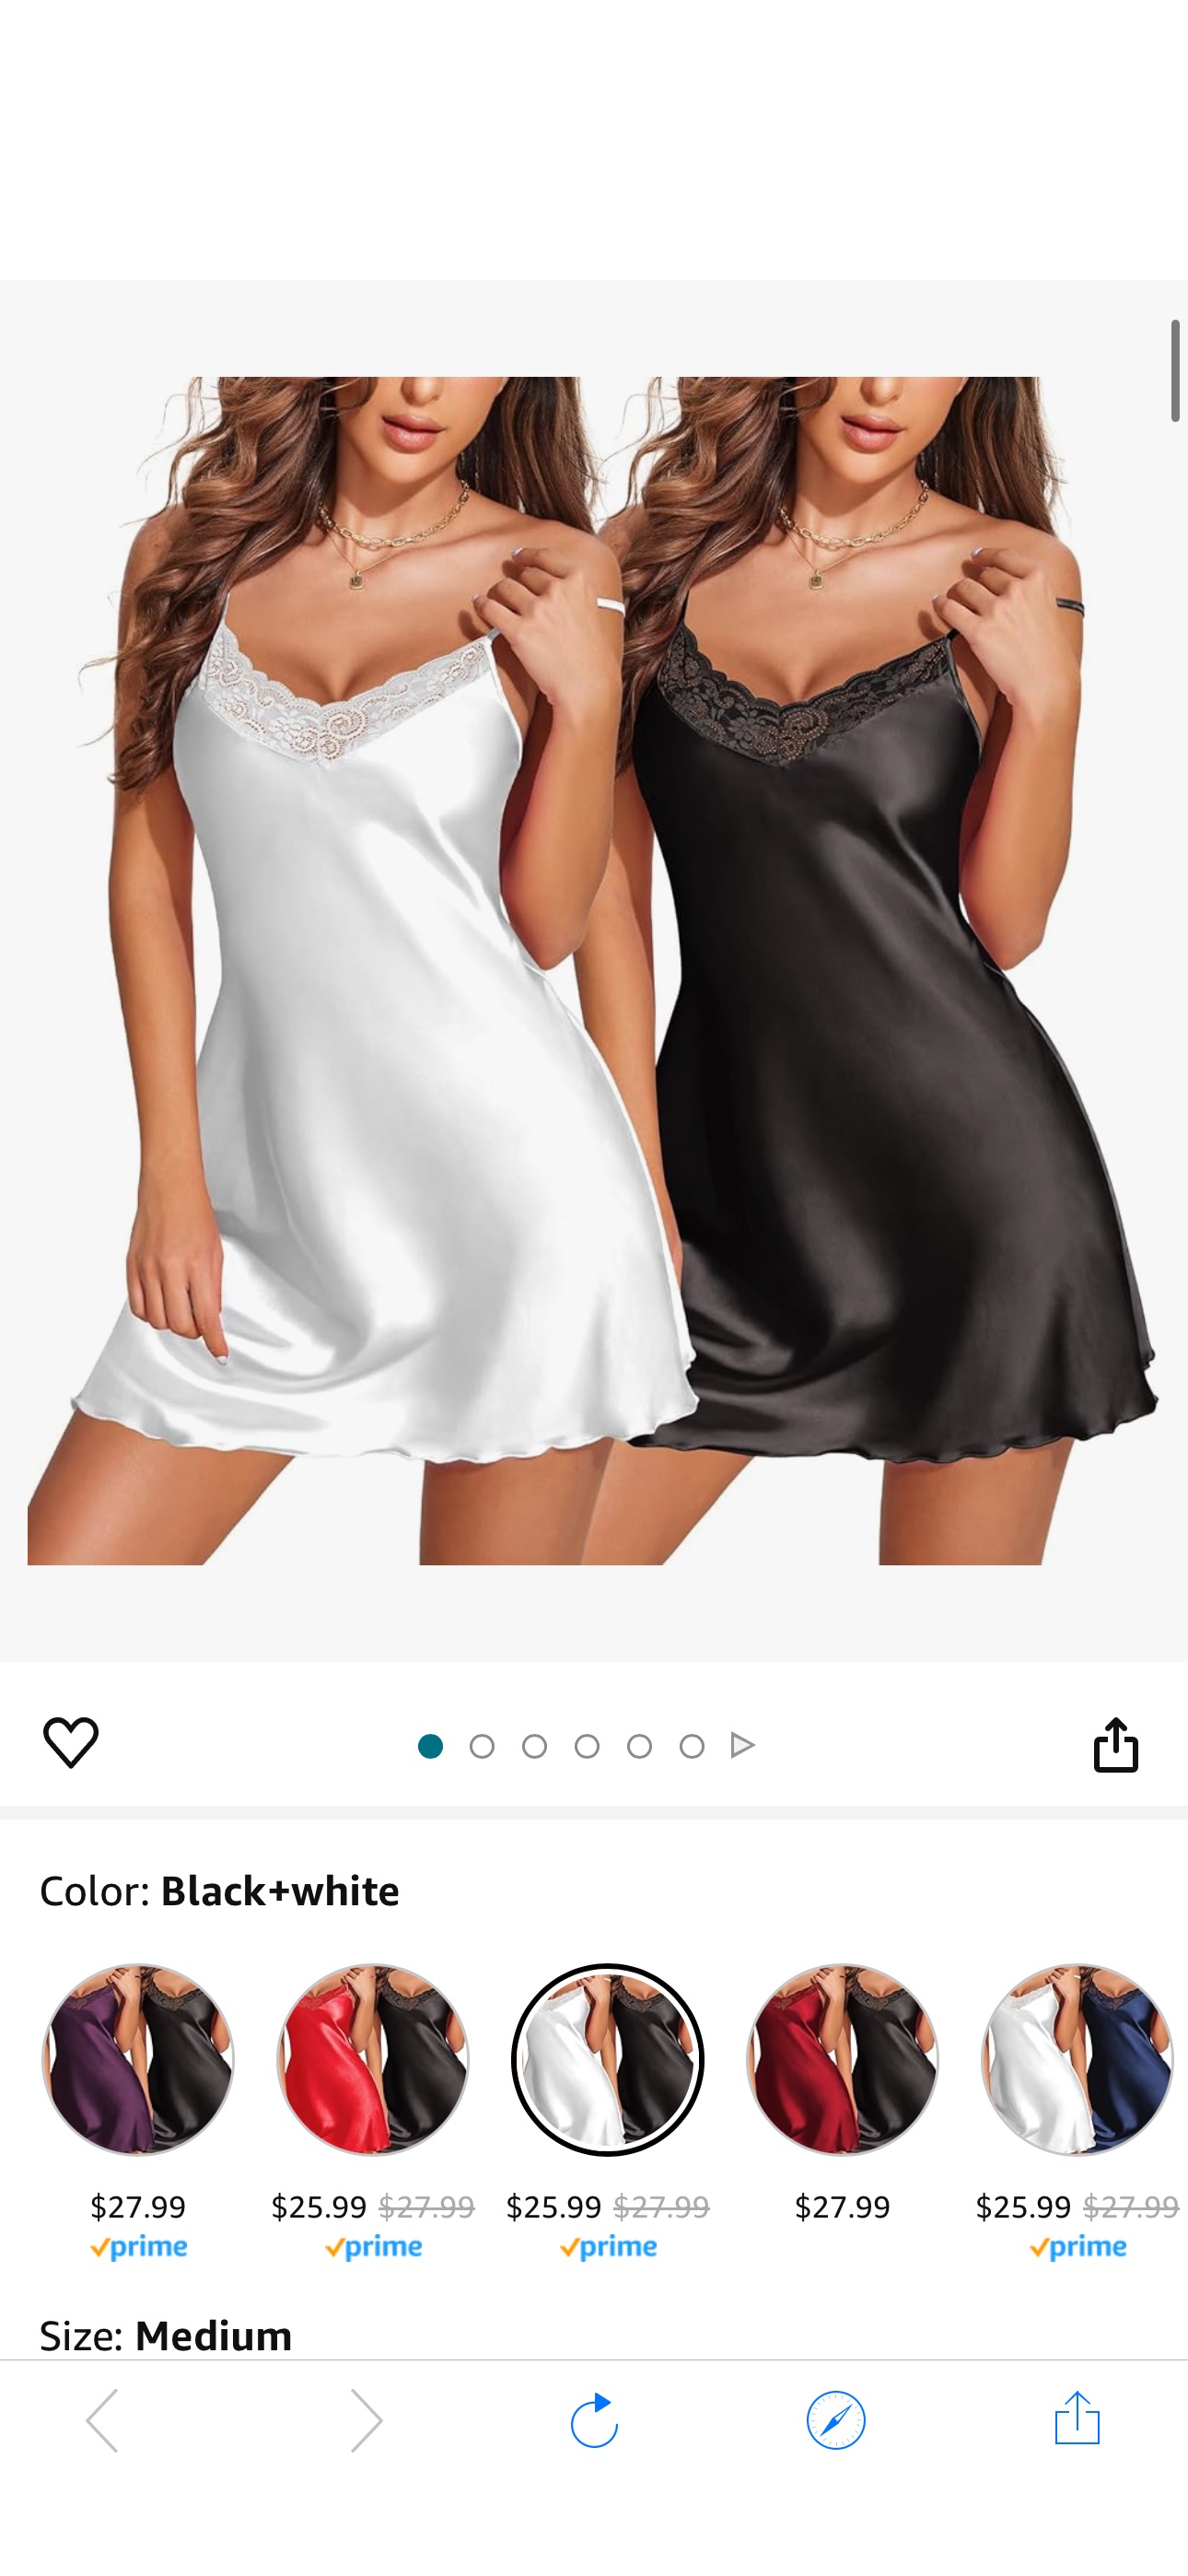 Ekouaer 2 Pack Nightgowns for Women Sexy Lingerie Lace Chemise Satin Slip Silk Negligee V-Neck Sleepwear Bridal Babydoll $12.xx 2 Pack Satin Nightgowns 
Clip coupon and use code OXT5FGJV